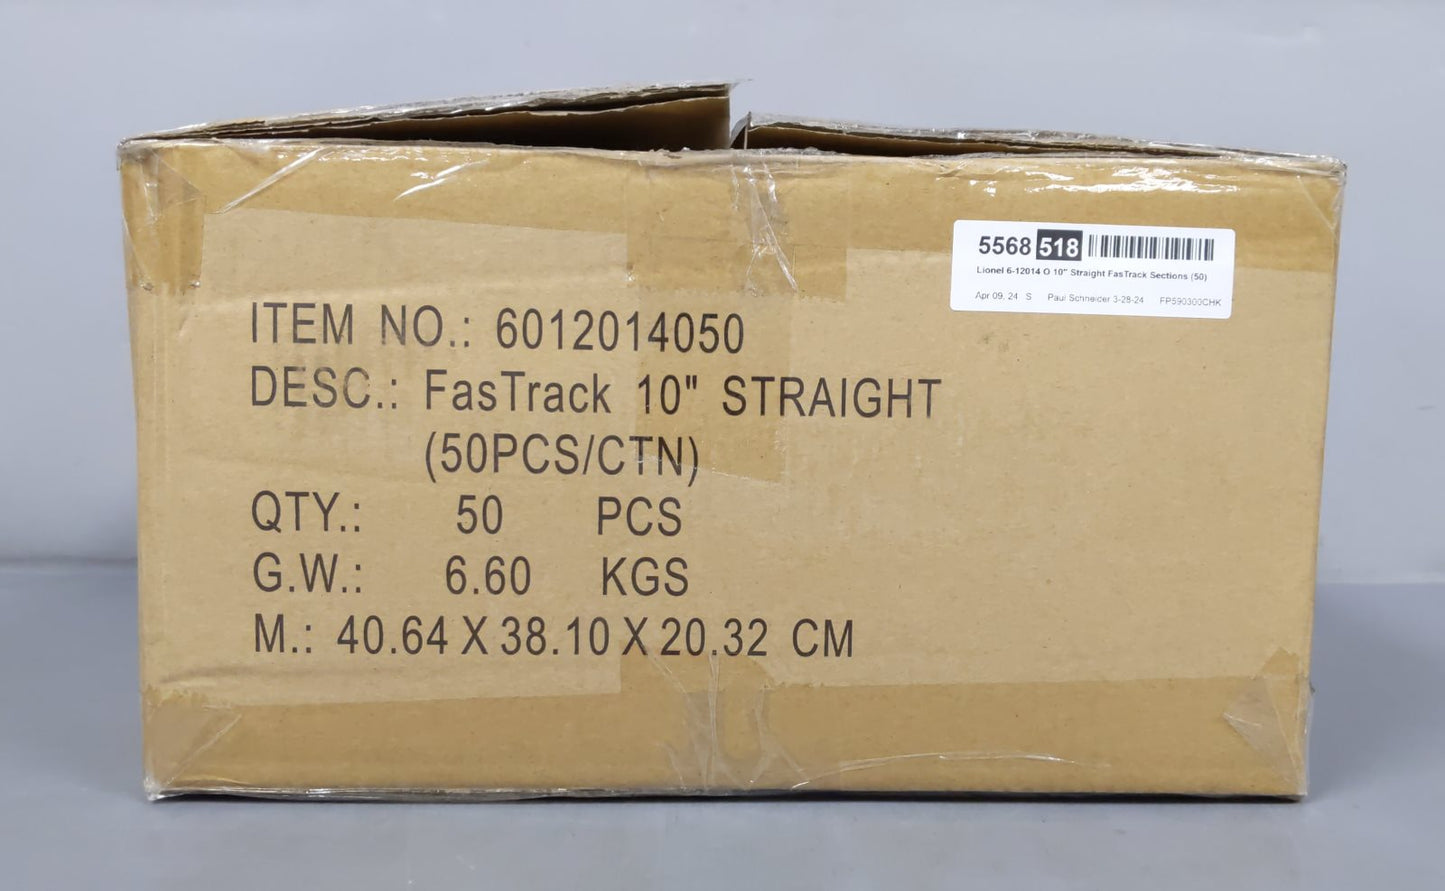 Lionel 6-12014 O 10" Straight FasTrack Sections (50) EX/Box